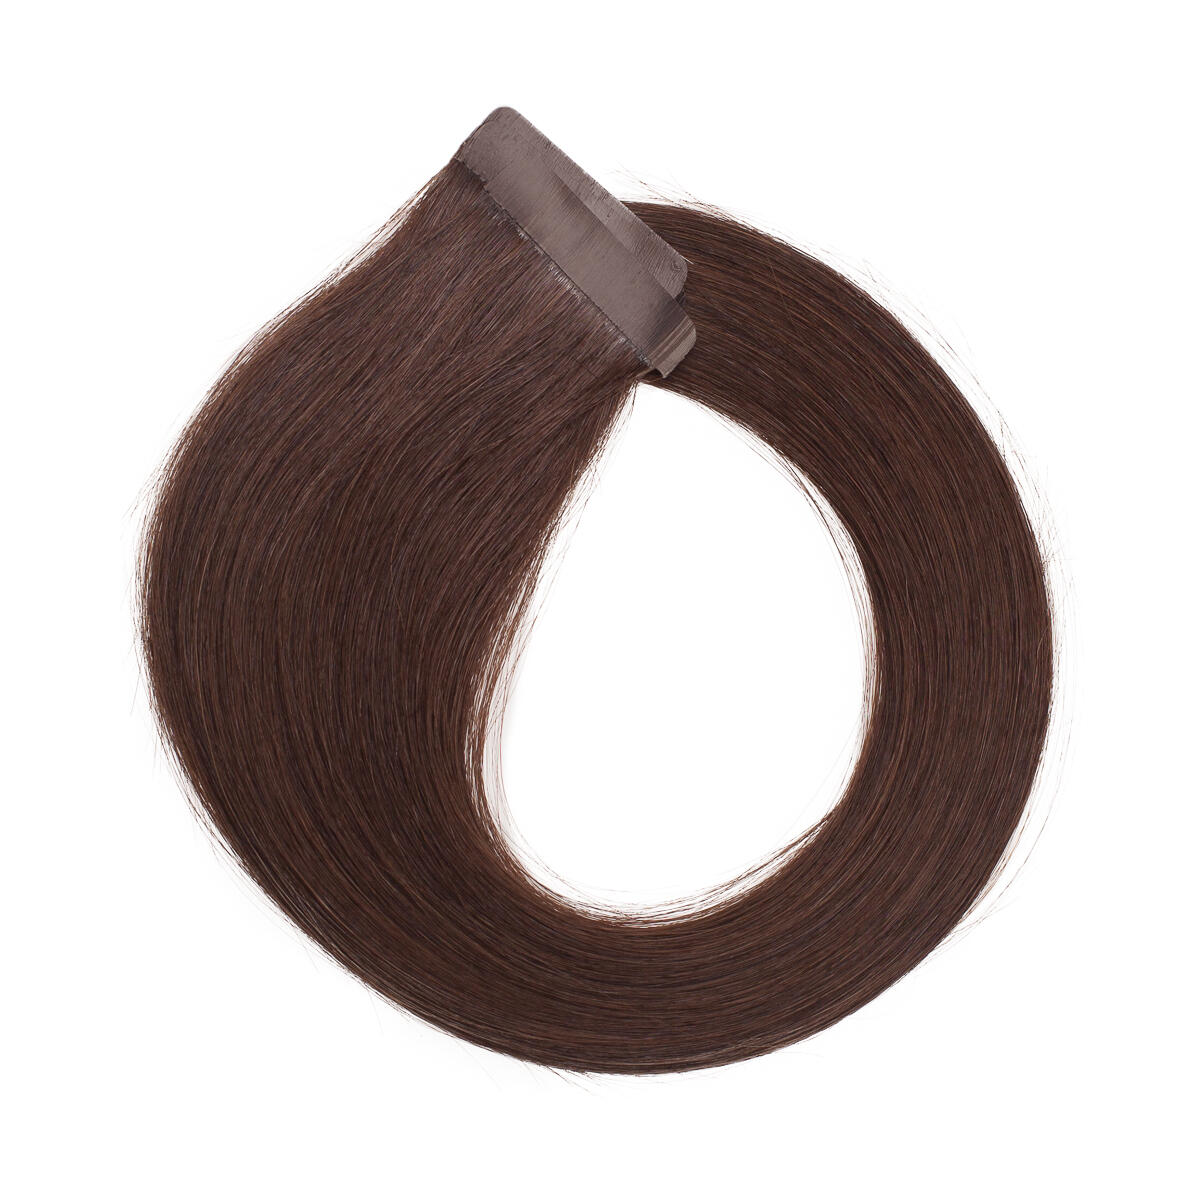 Basic Tape Extensions Classic 4 2.4 Chad Wood Natural Brown 50 cm